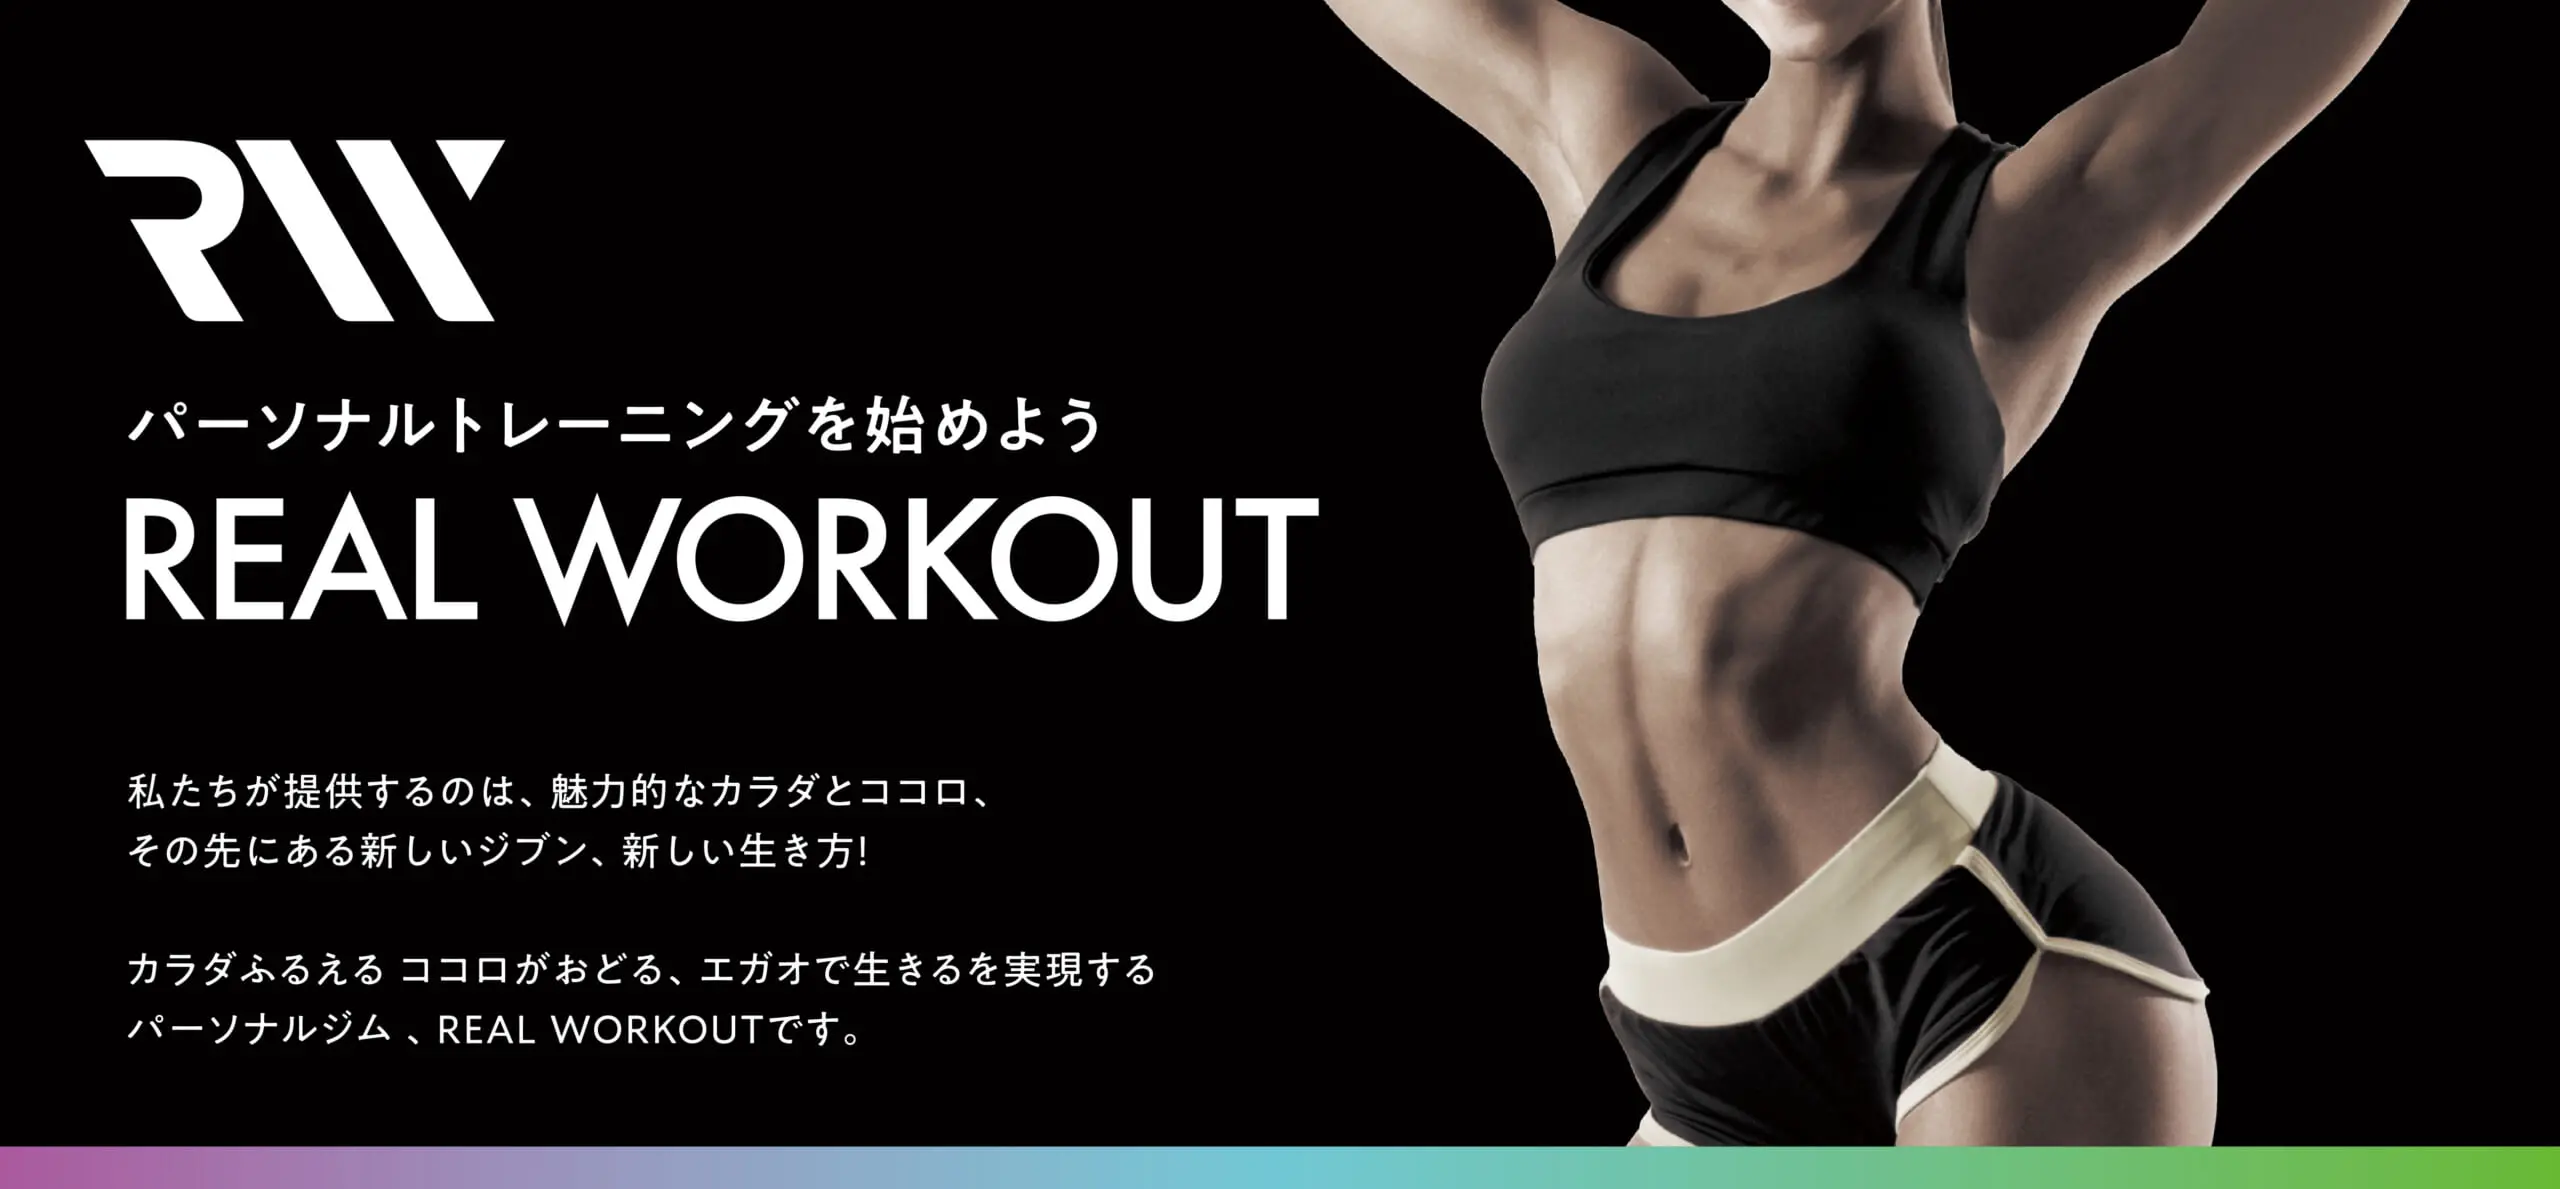 REAL WORKOUT羽田店の画像